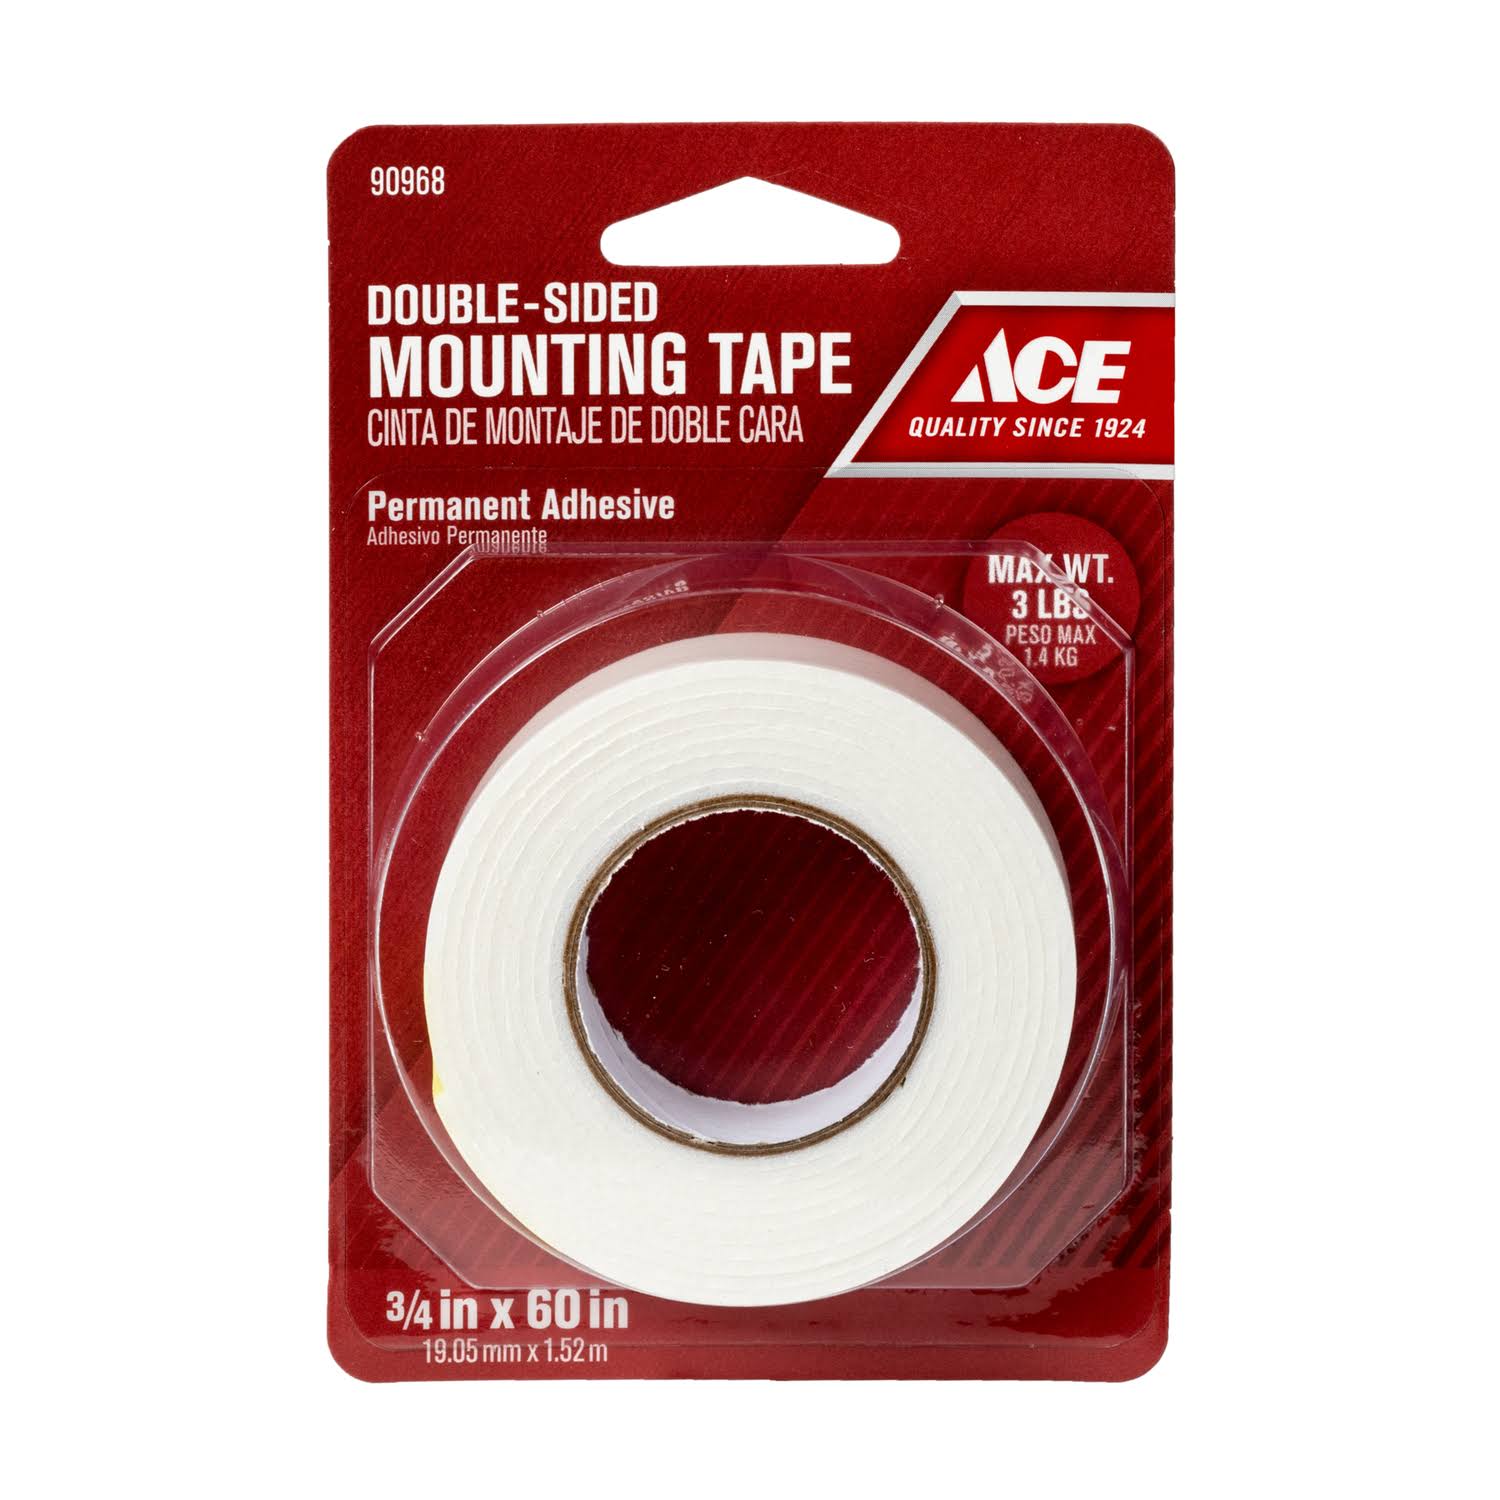 Ace 3/4 in. W x 60 in. L Mounting Tape White